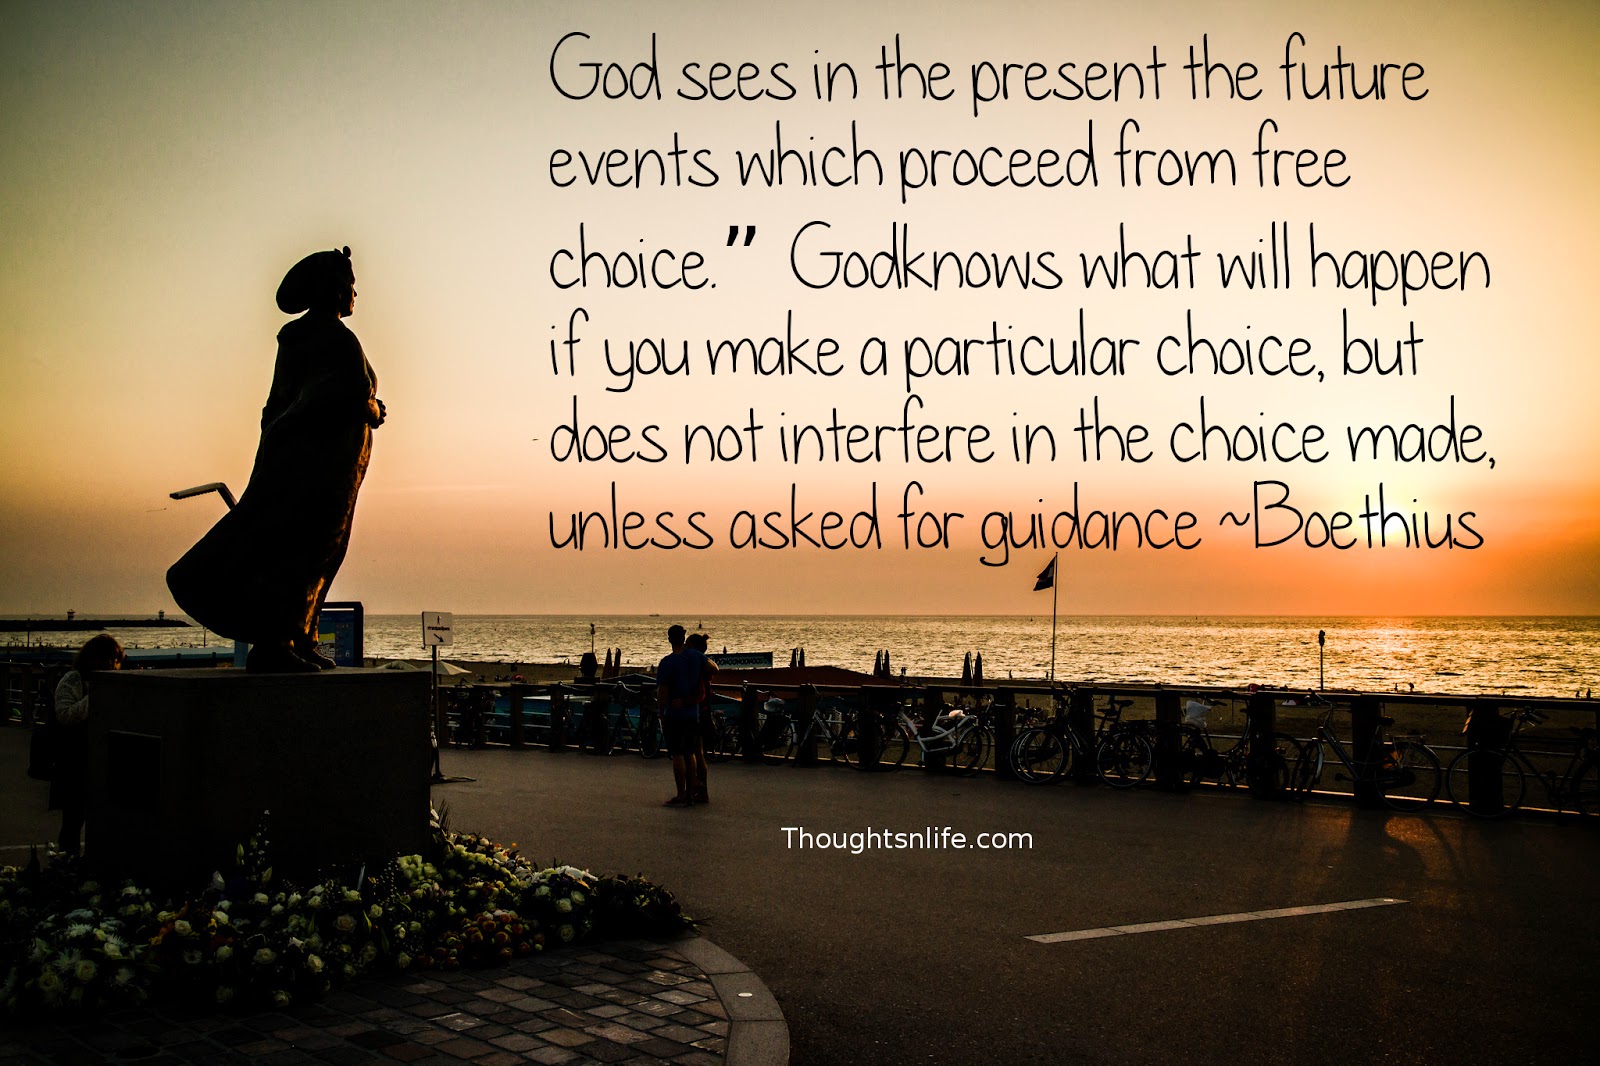 God sees in the present the future events